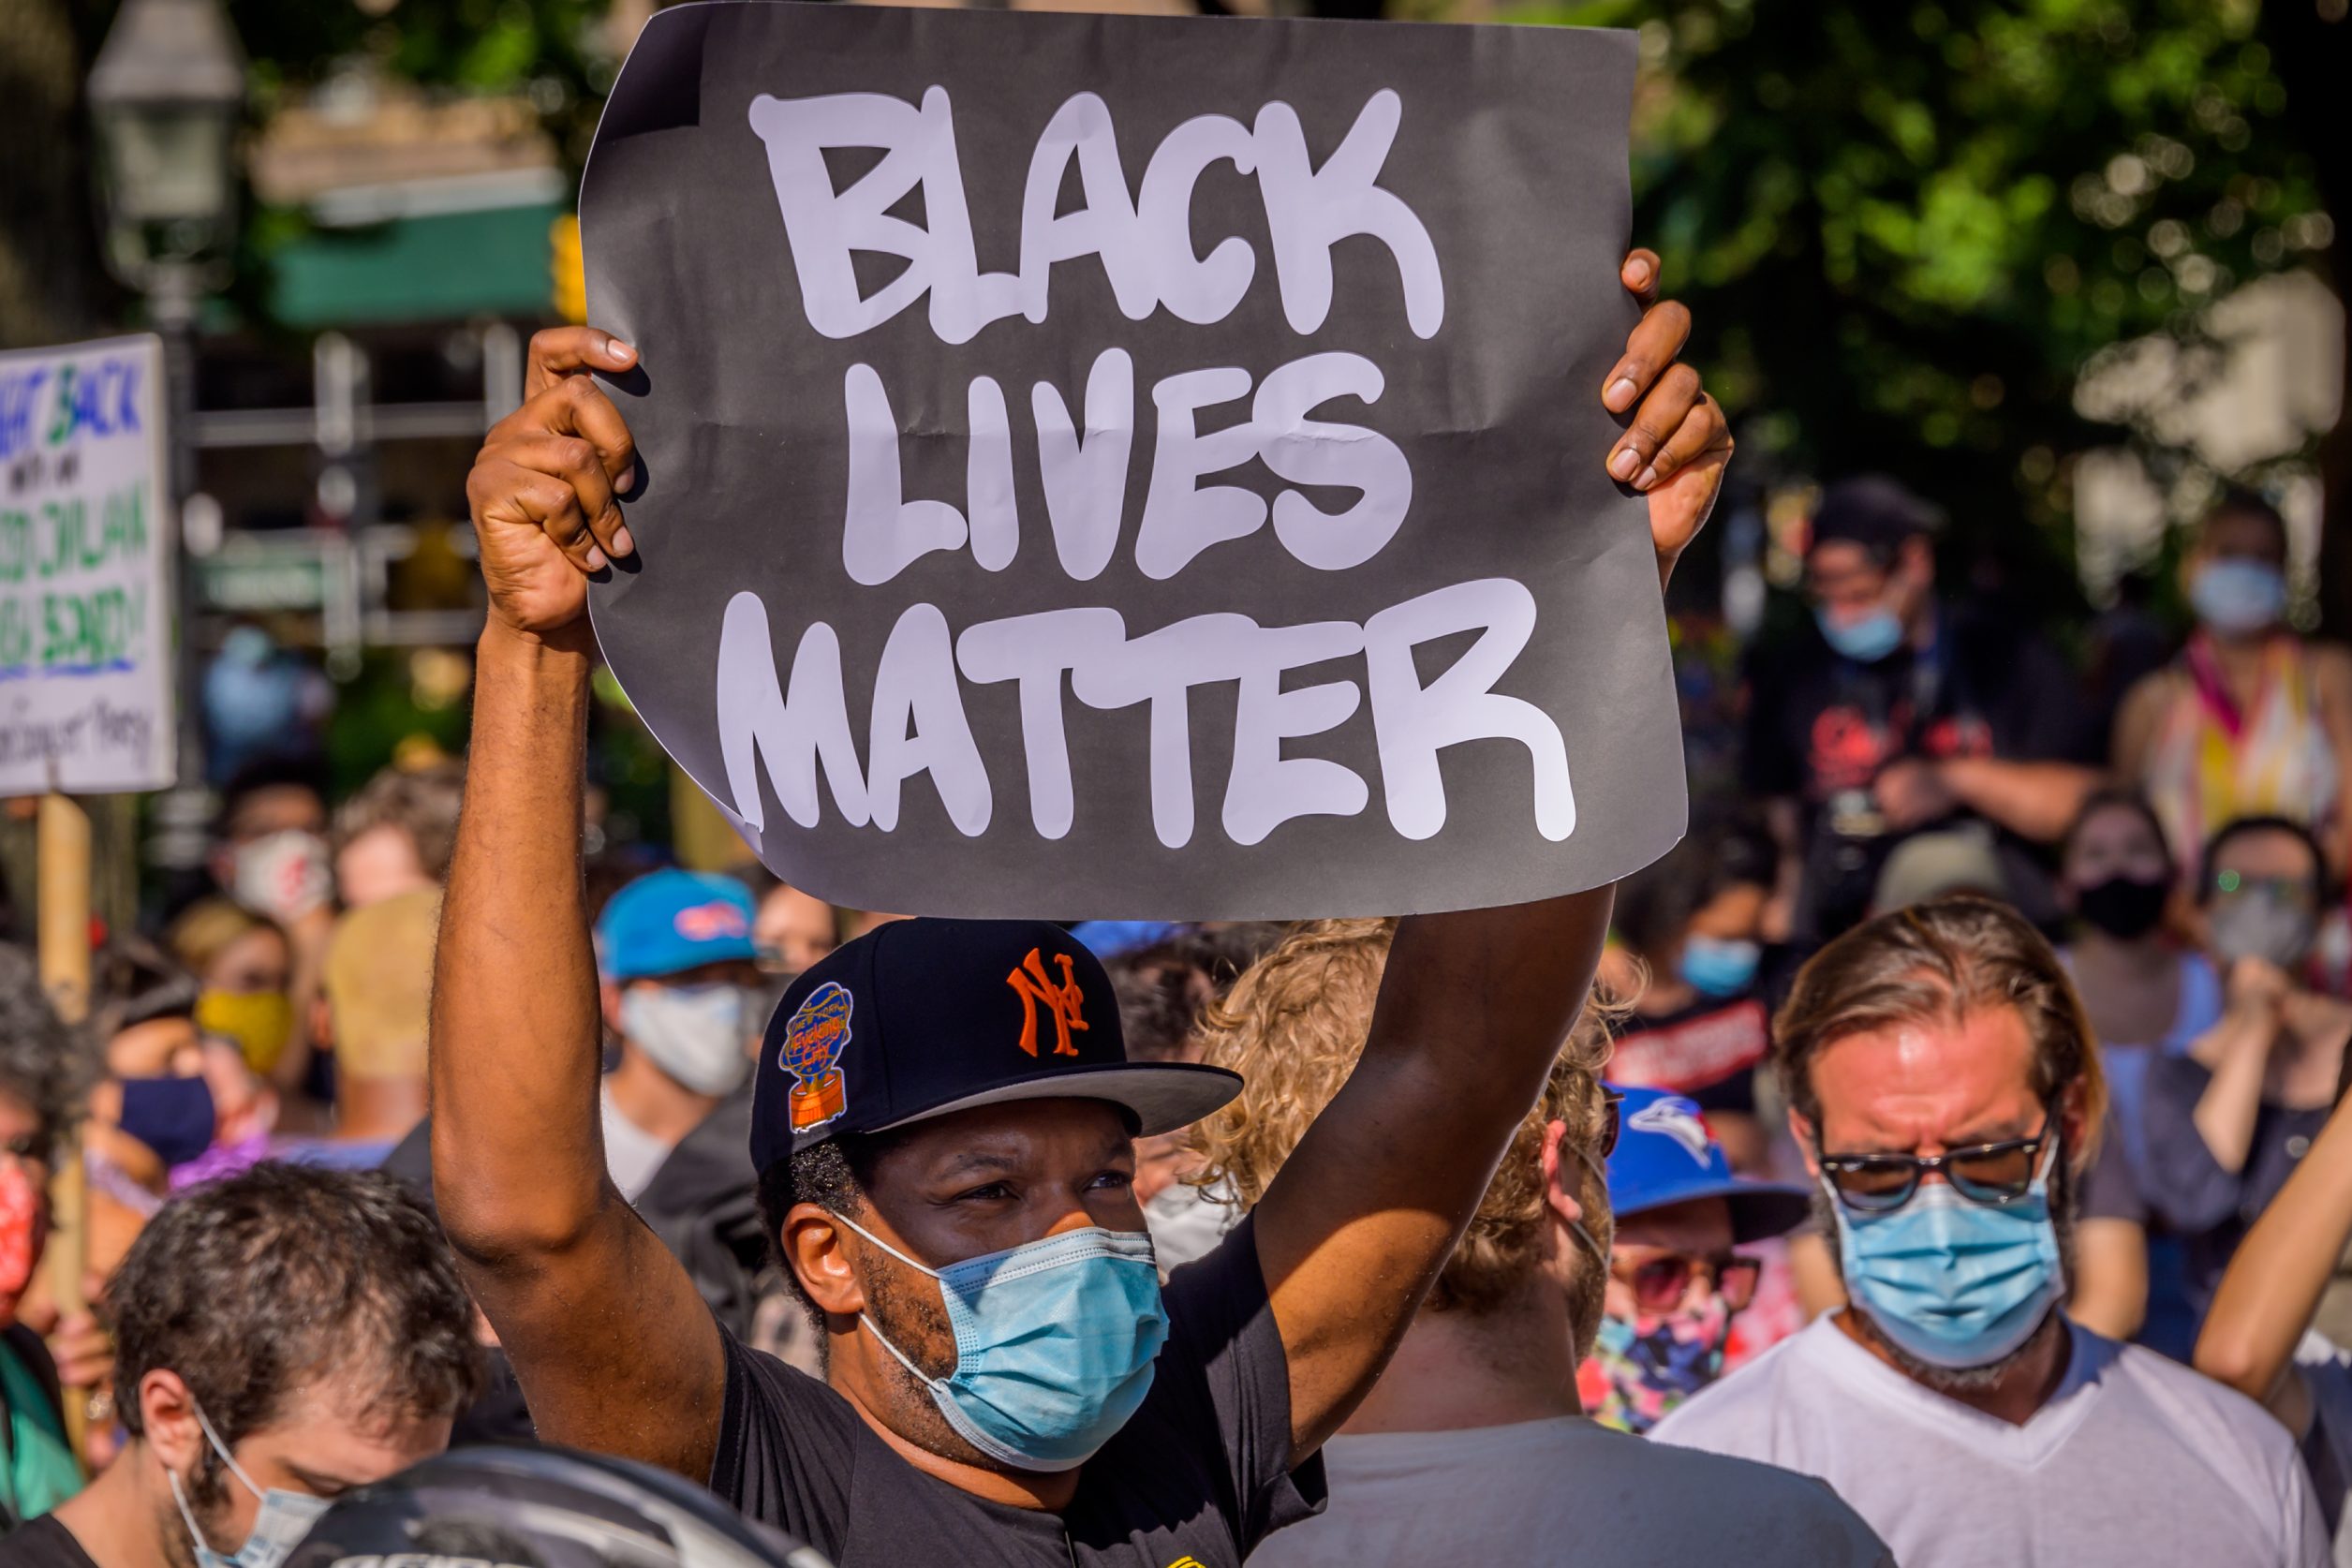 A participant holding a Black Lives Matter sign at the